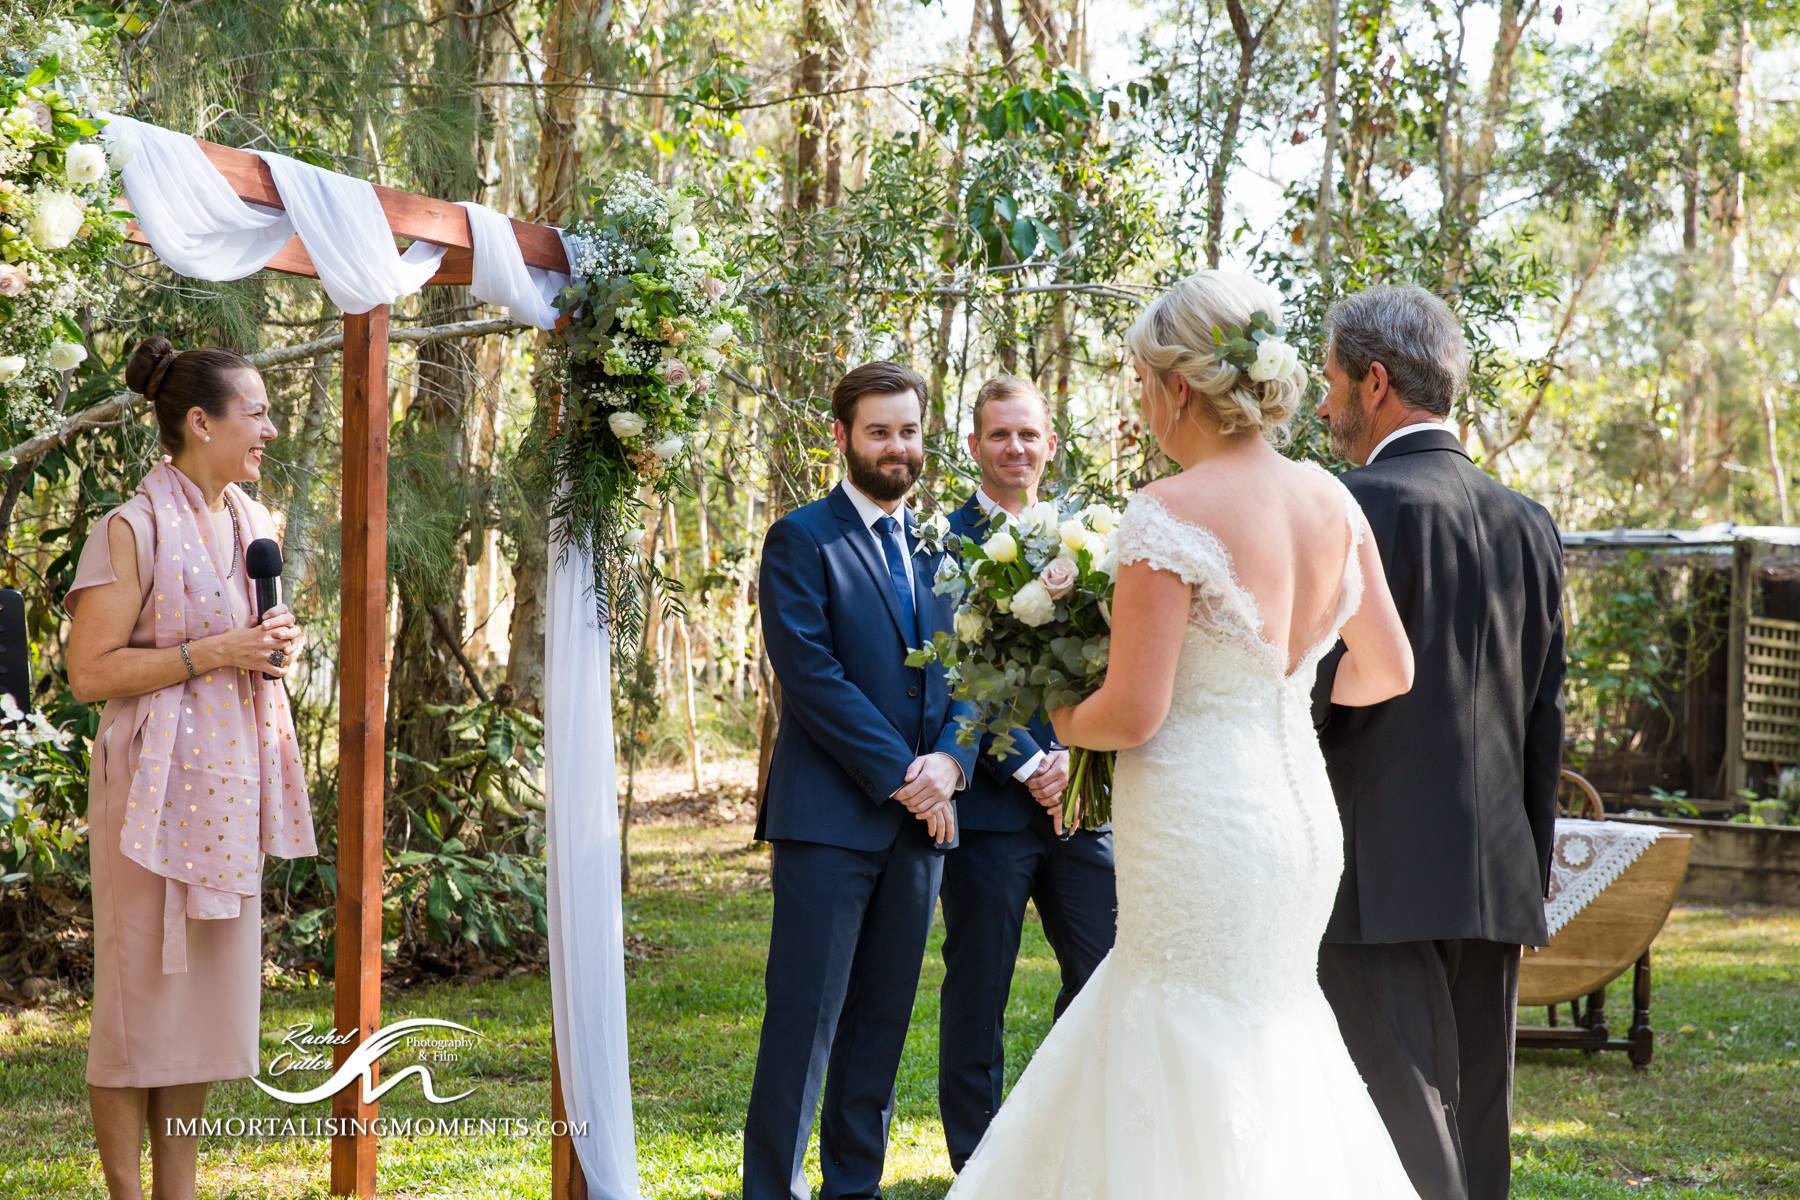 dad in grey suit walks his daughter down aisle to waiting groom in blue suit, smiling celebrant in pink ready to start wedding ceremony